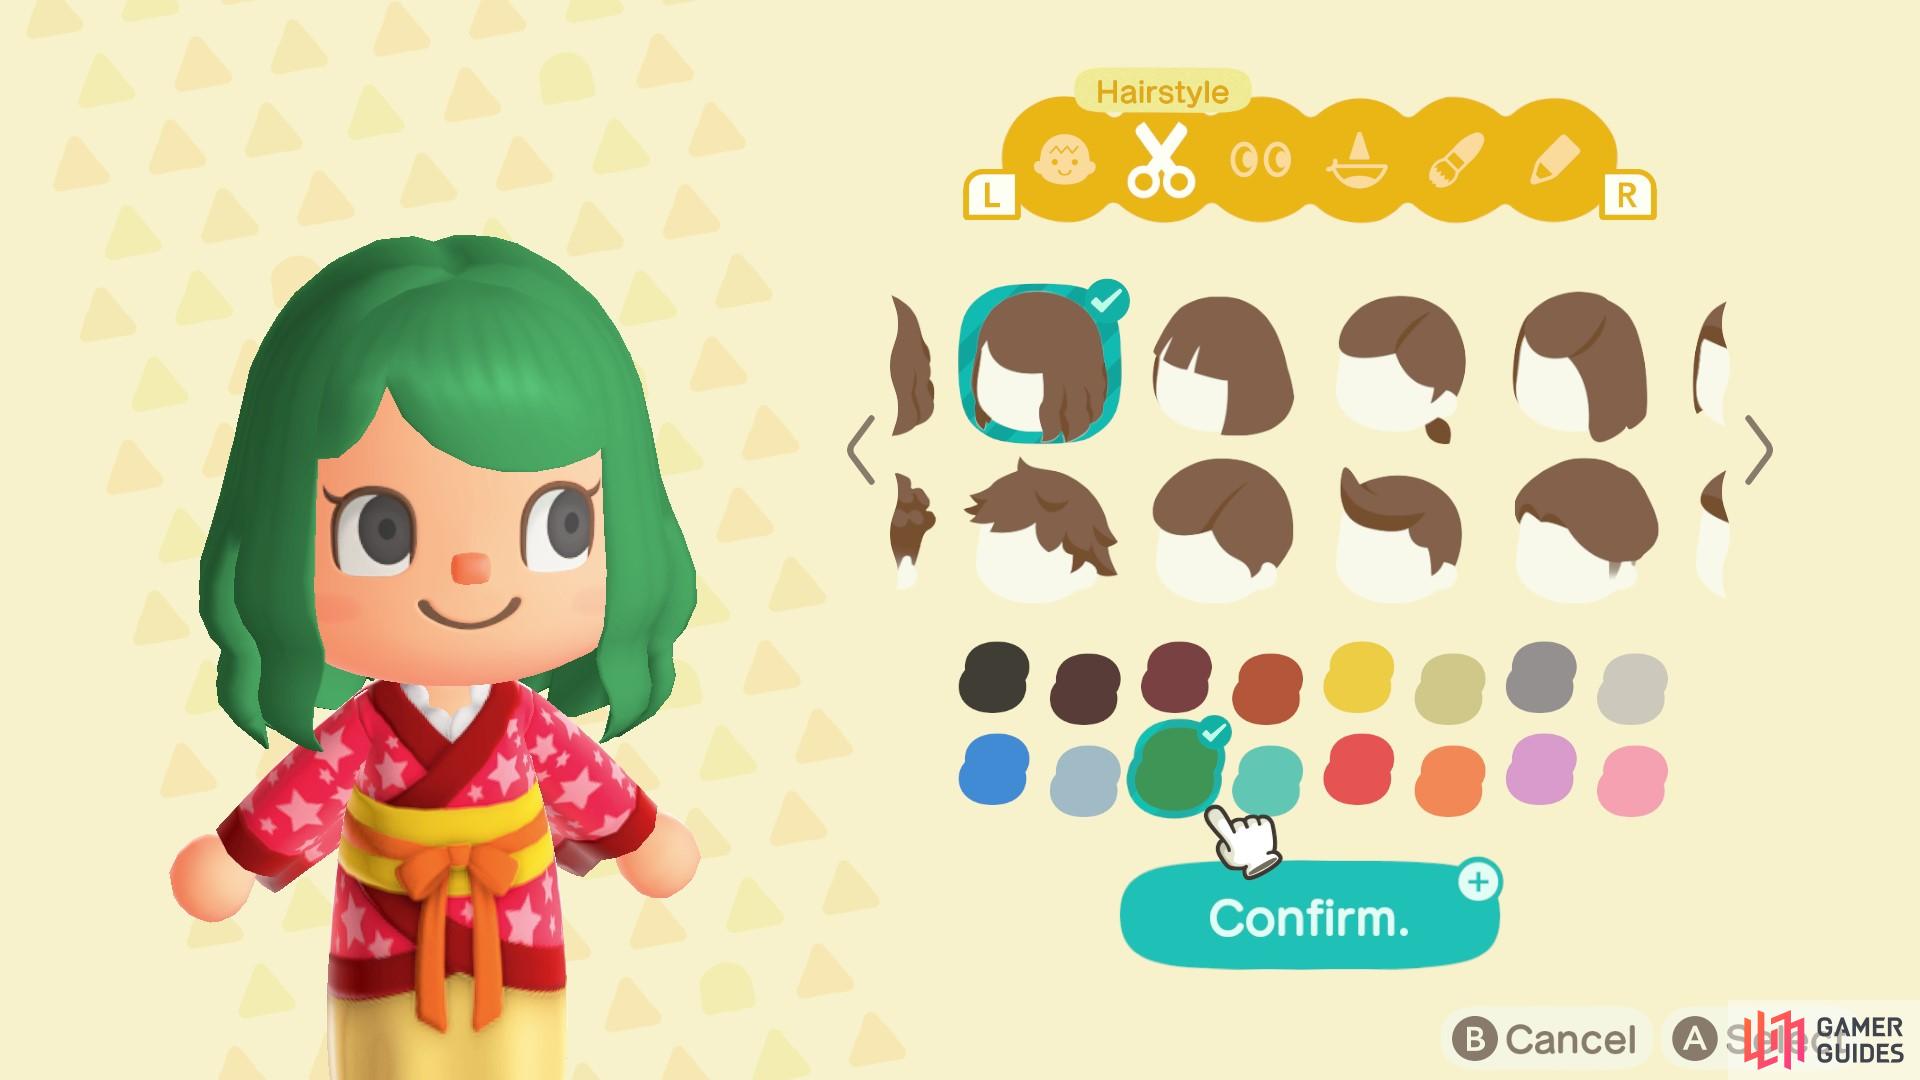 This hairstyle is from the Cool Hairstyles set.